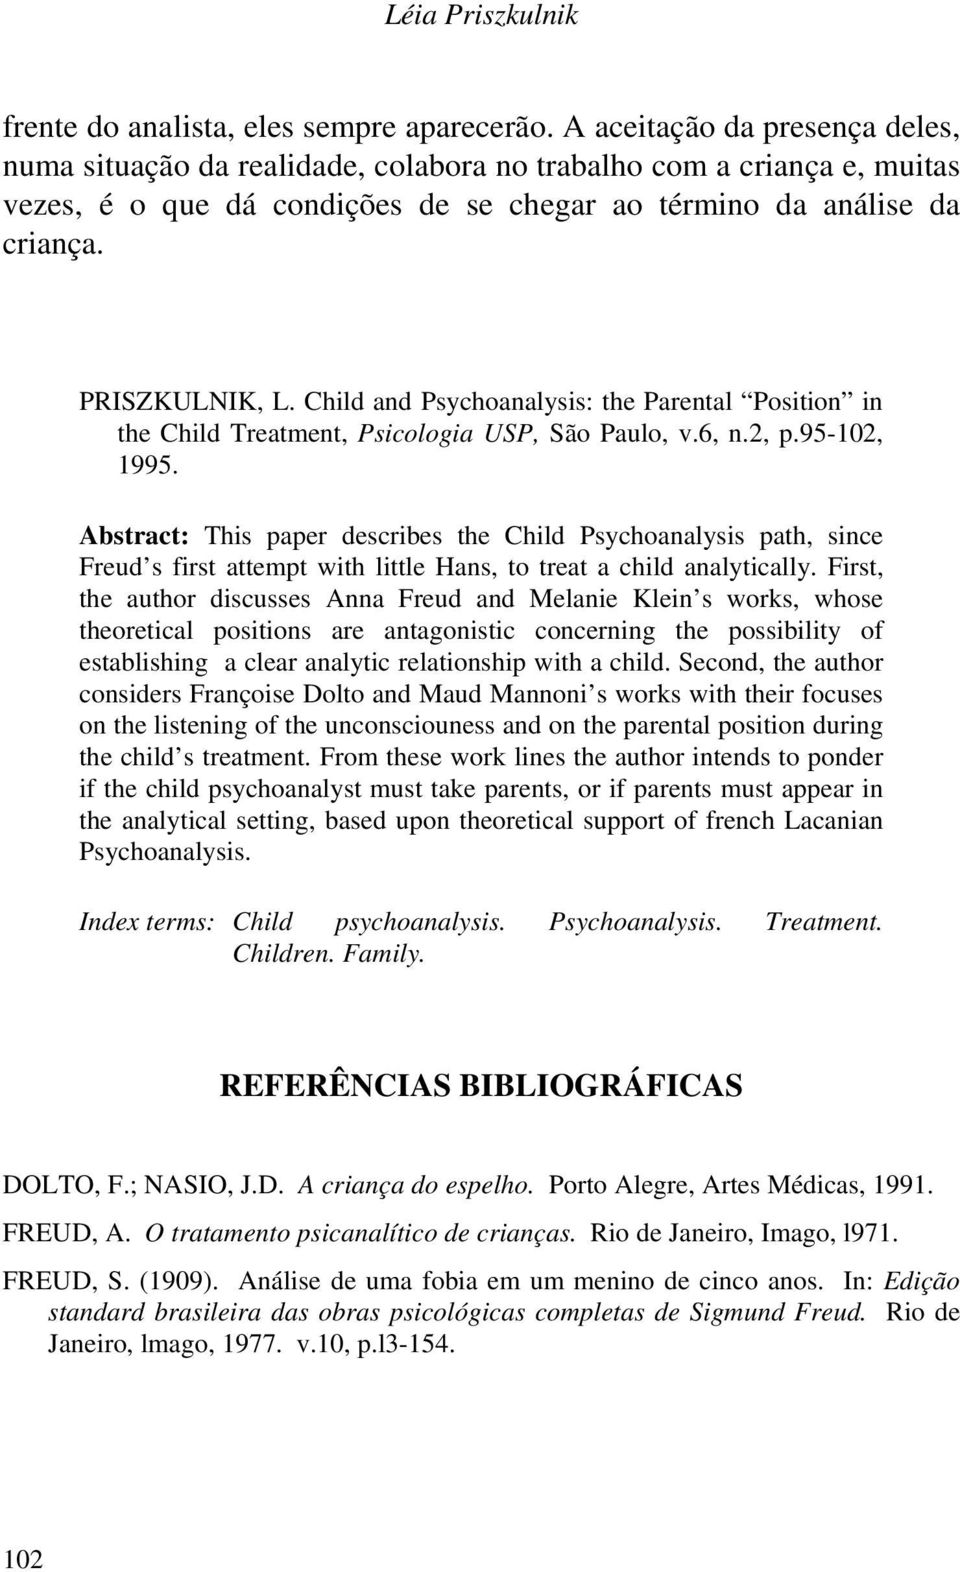 Child and Psychoanalysis: the Parental Position in the Child Treatment, Psicologia USP, São Paulo, v.6, n.2, p.95-102, 1995.